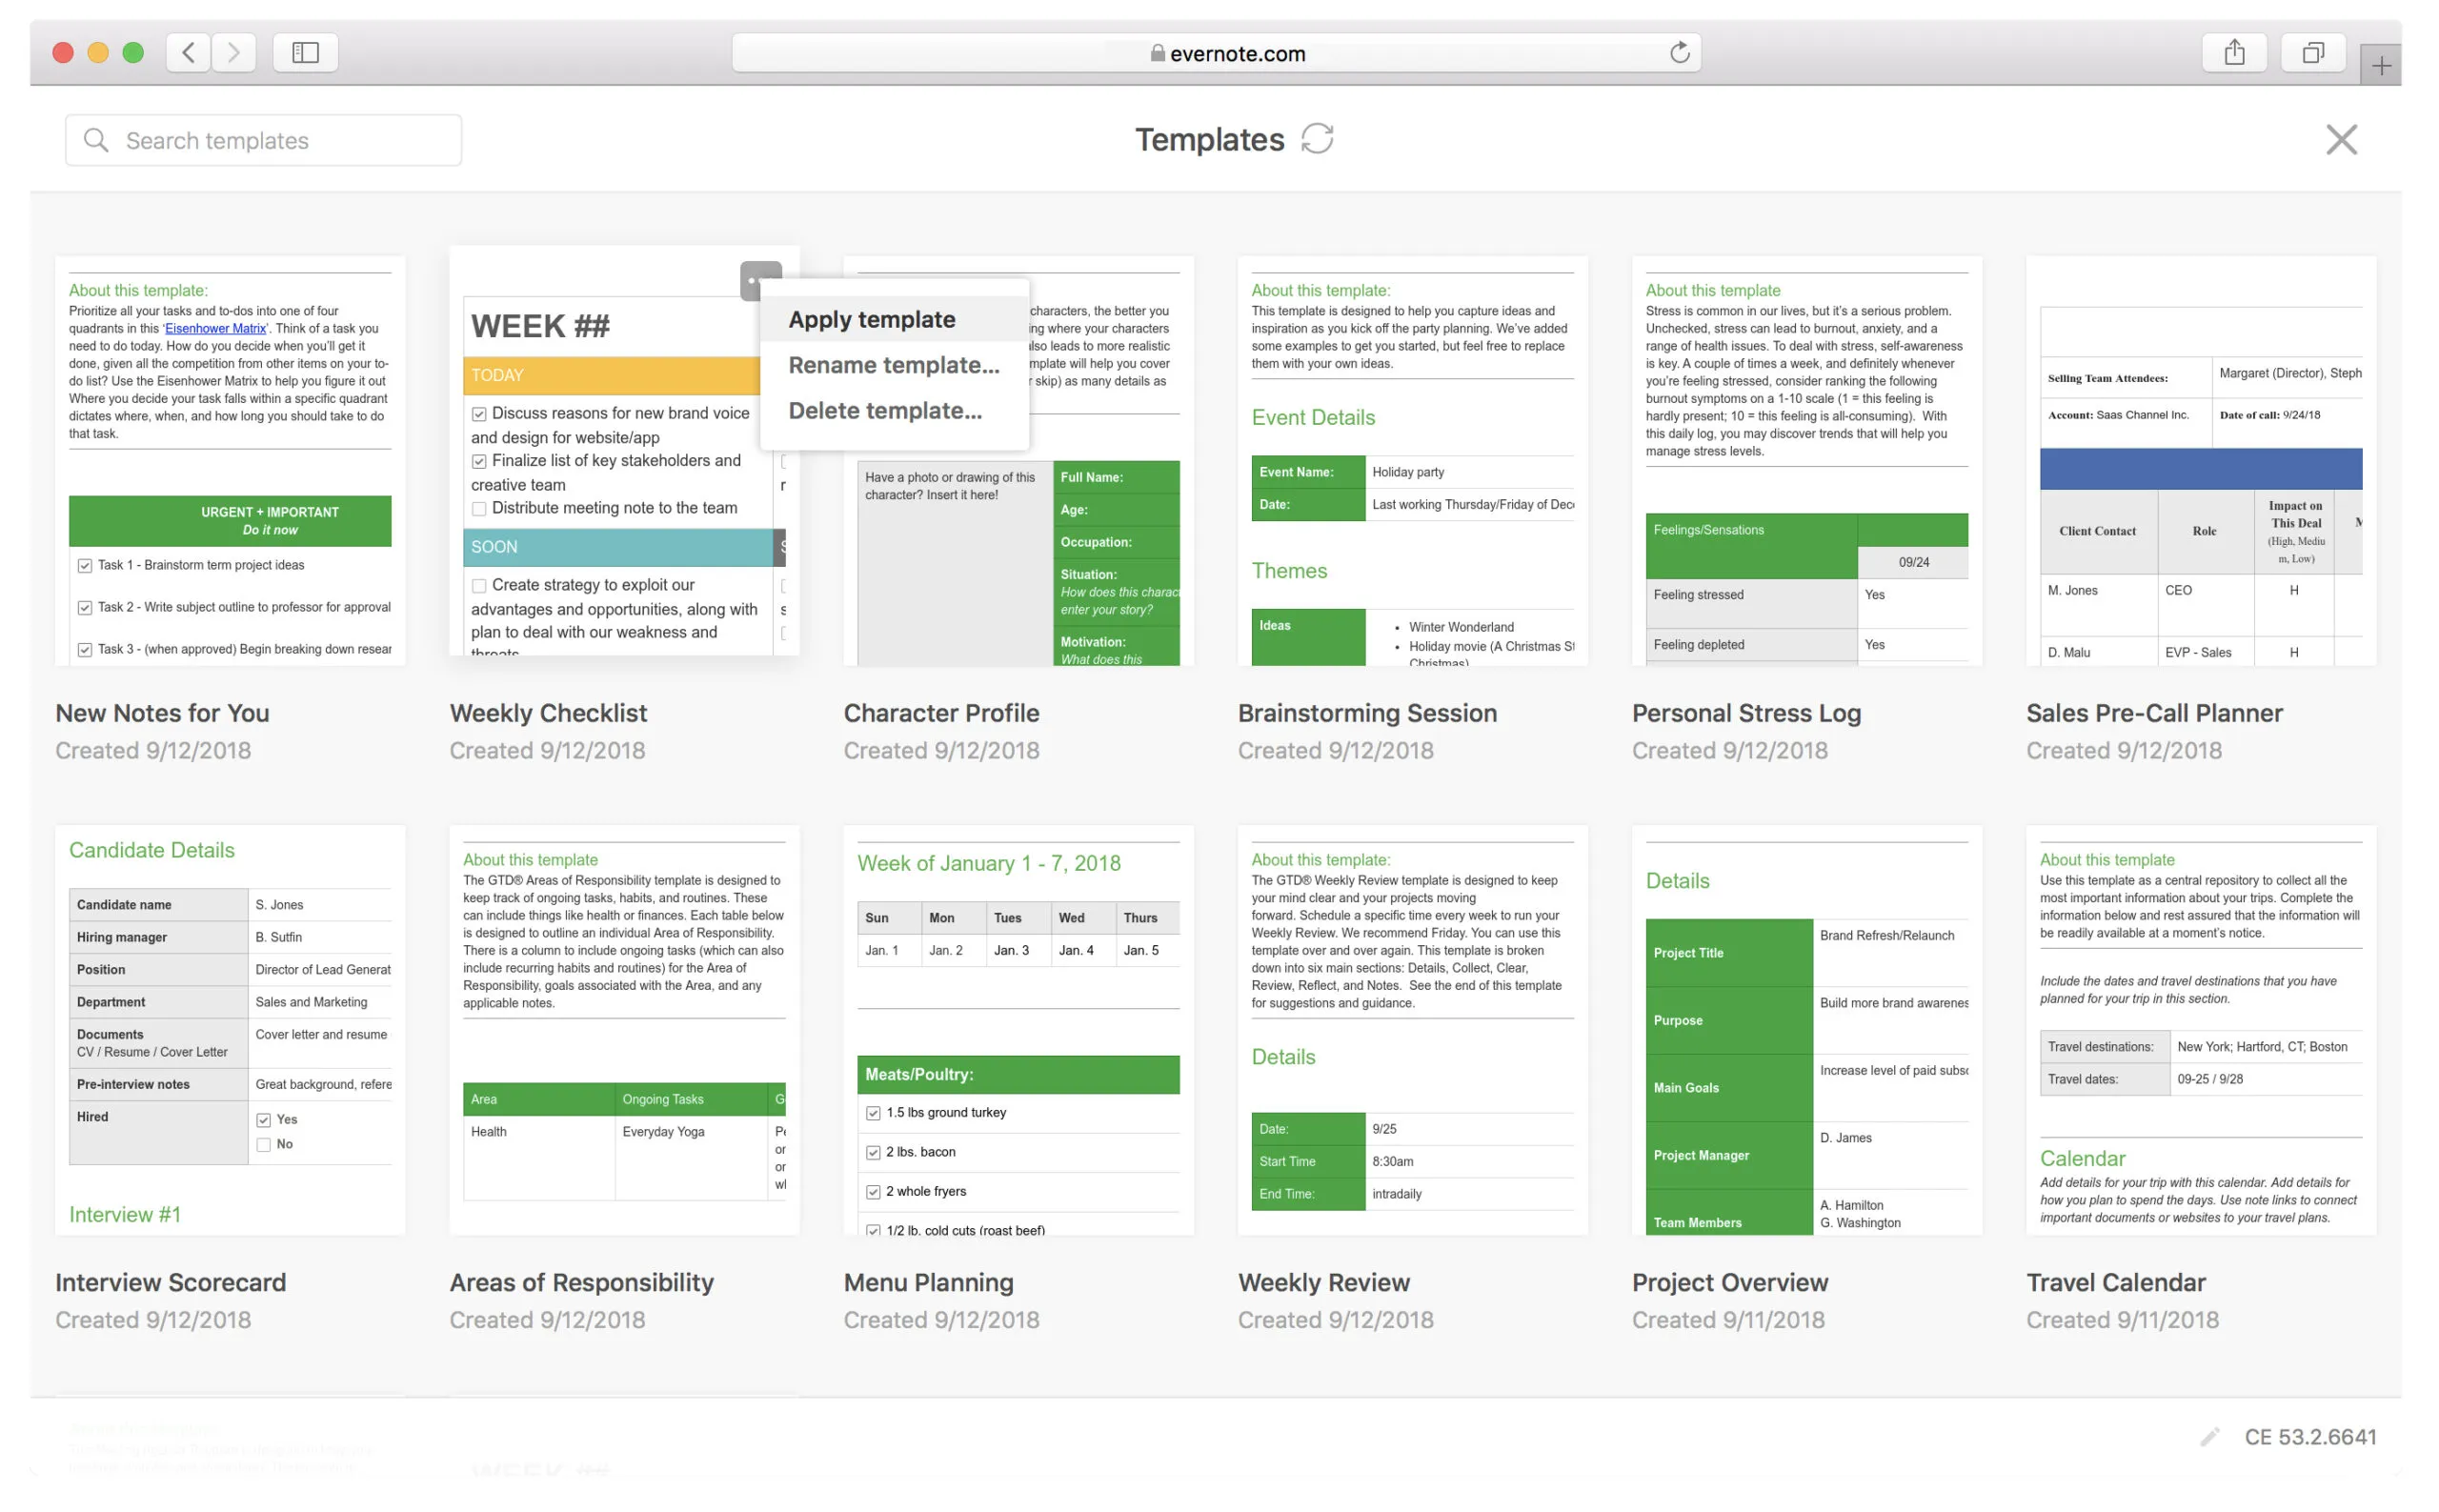 Evernote online notes taker